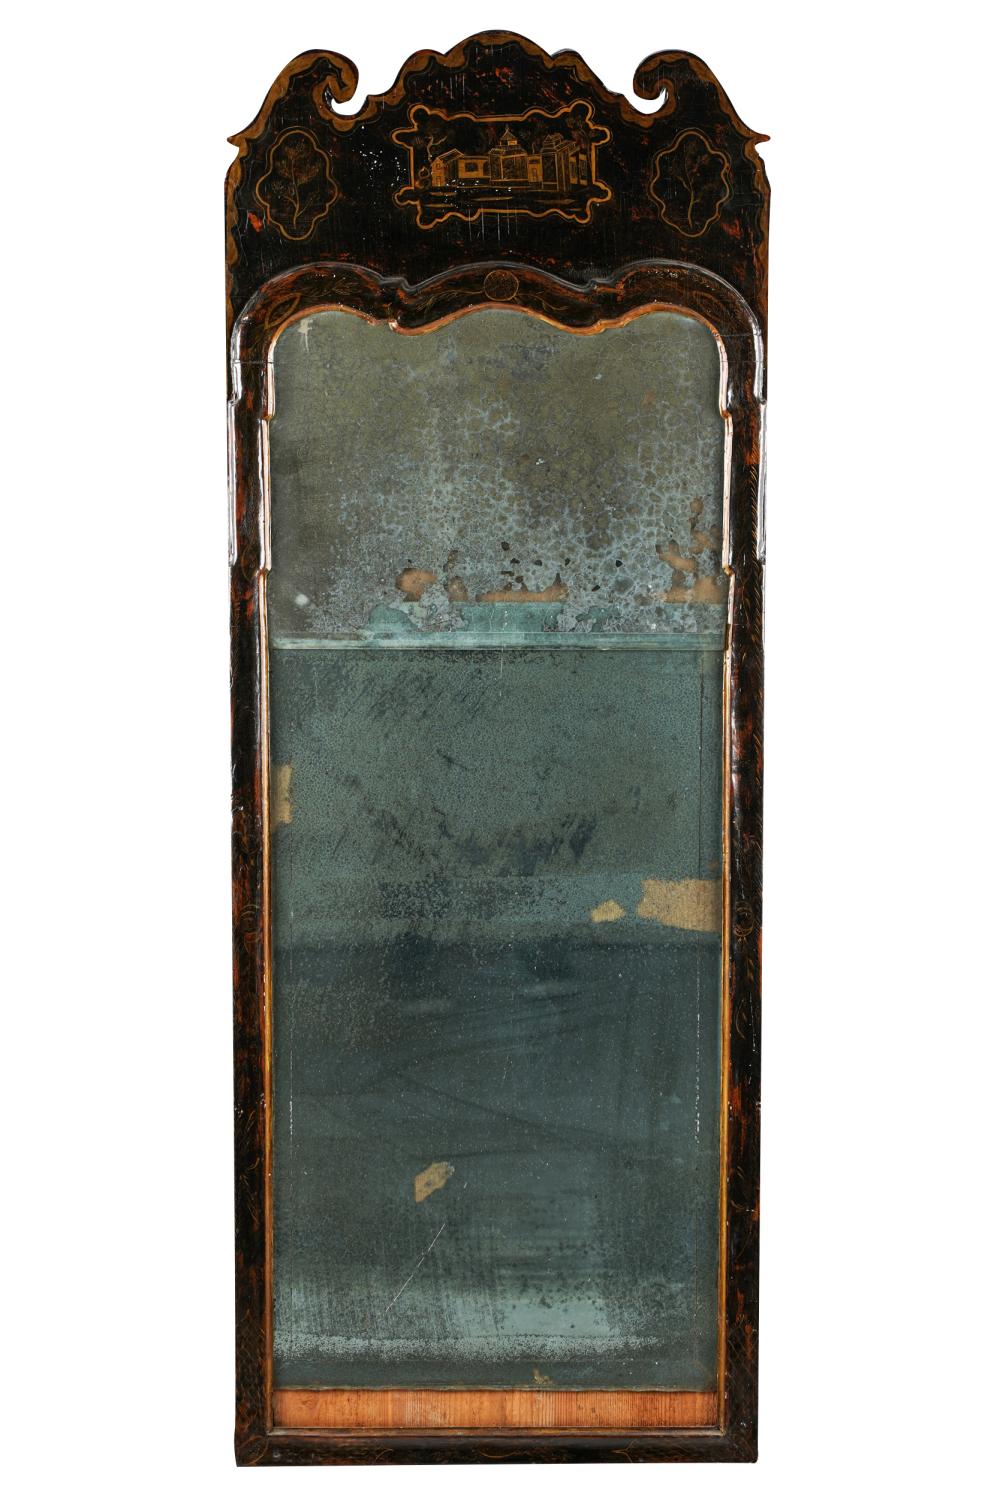 ENGLISH JAPANNED WALL MIRRORwith 333393